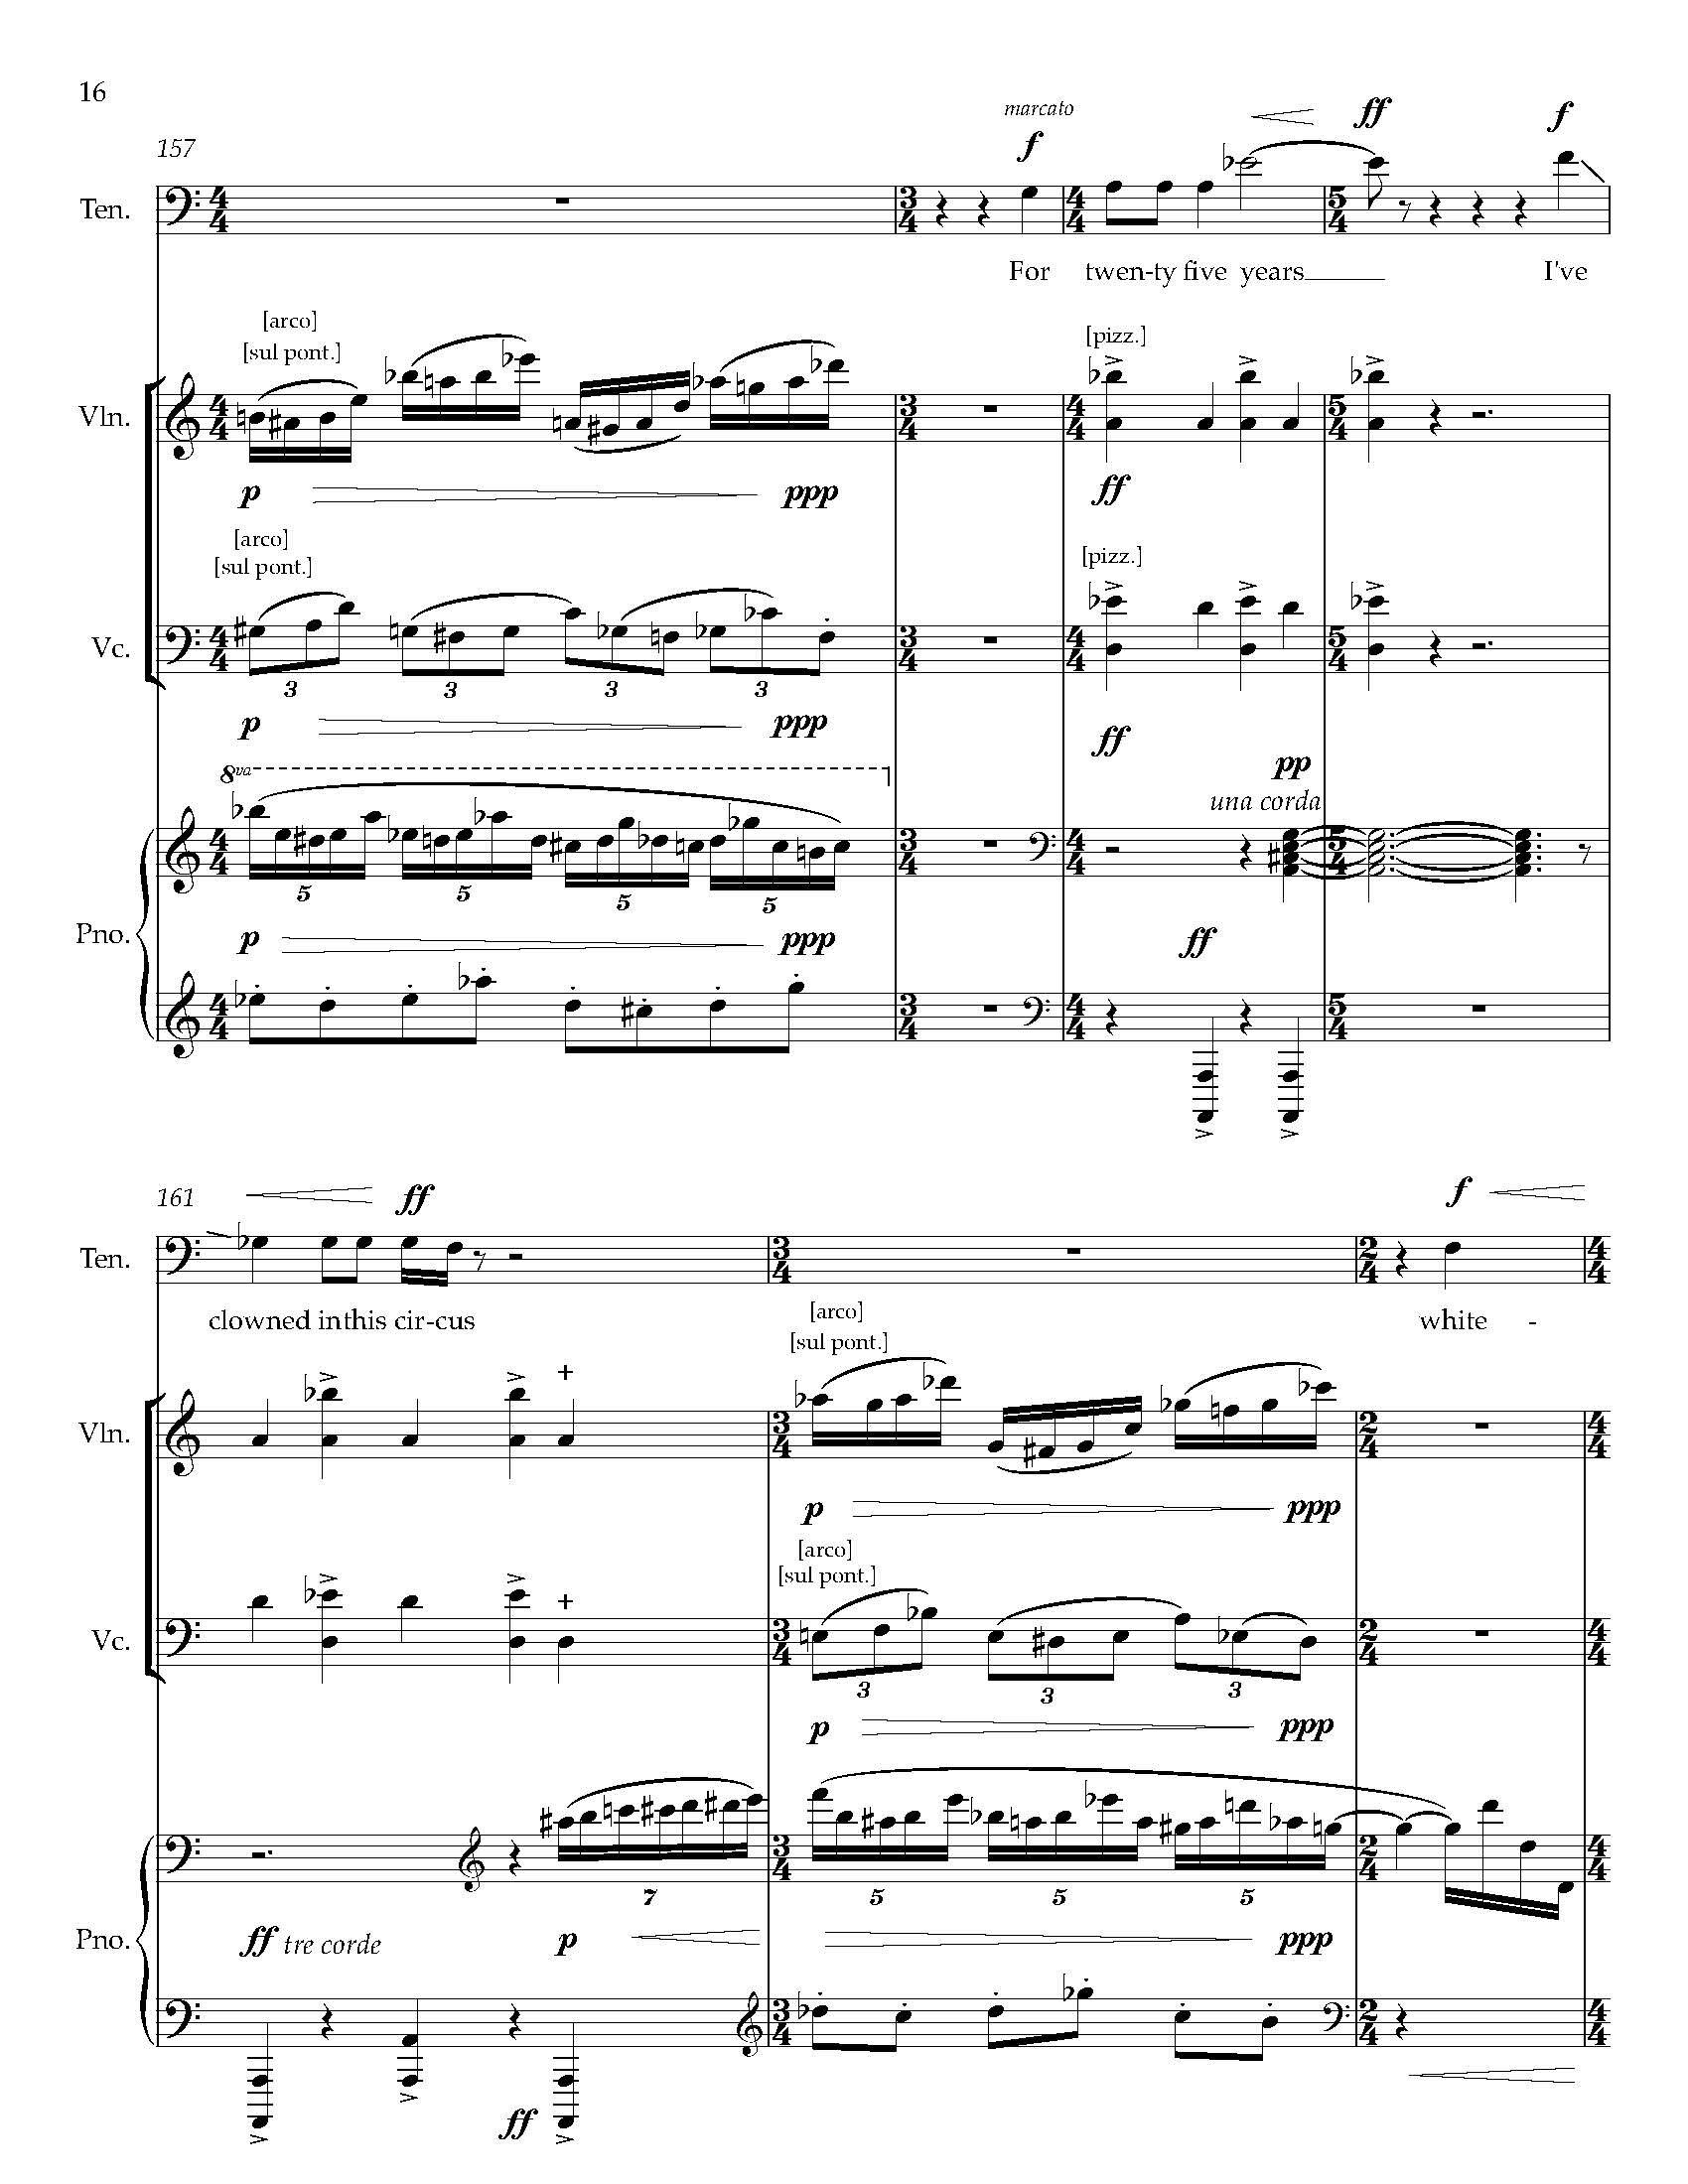 Gursky Songs - Complete Score_Page_24.jpg